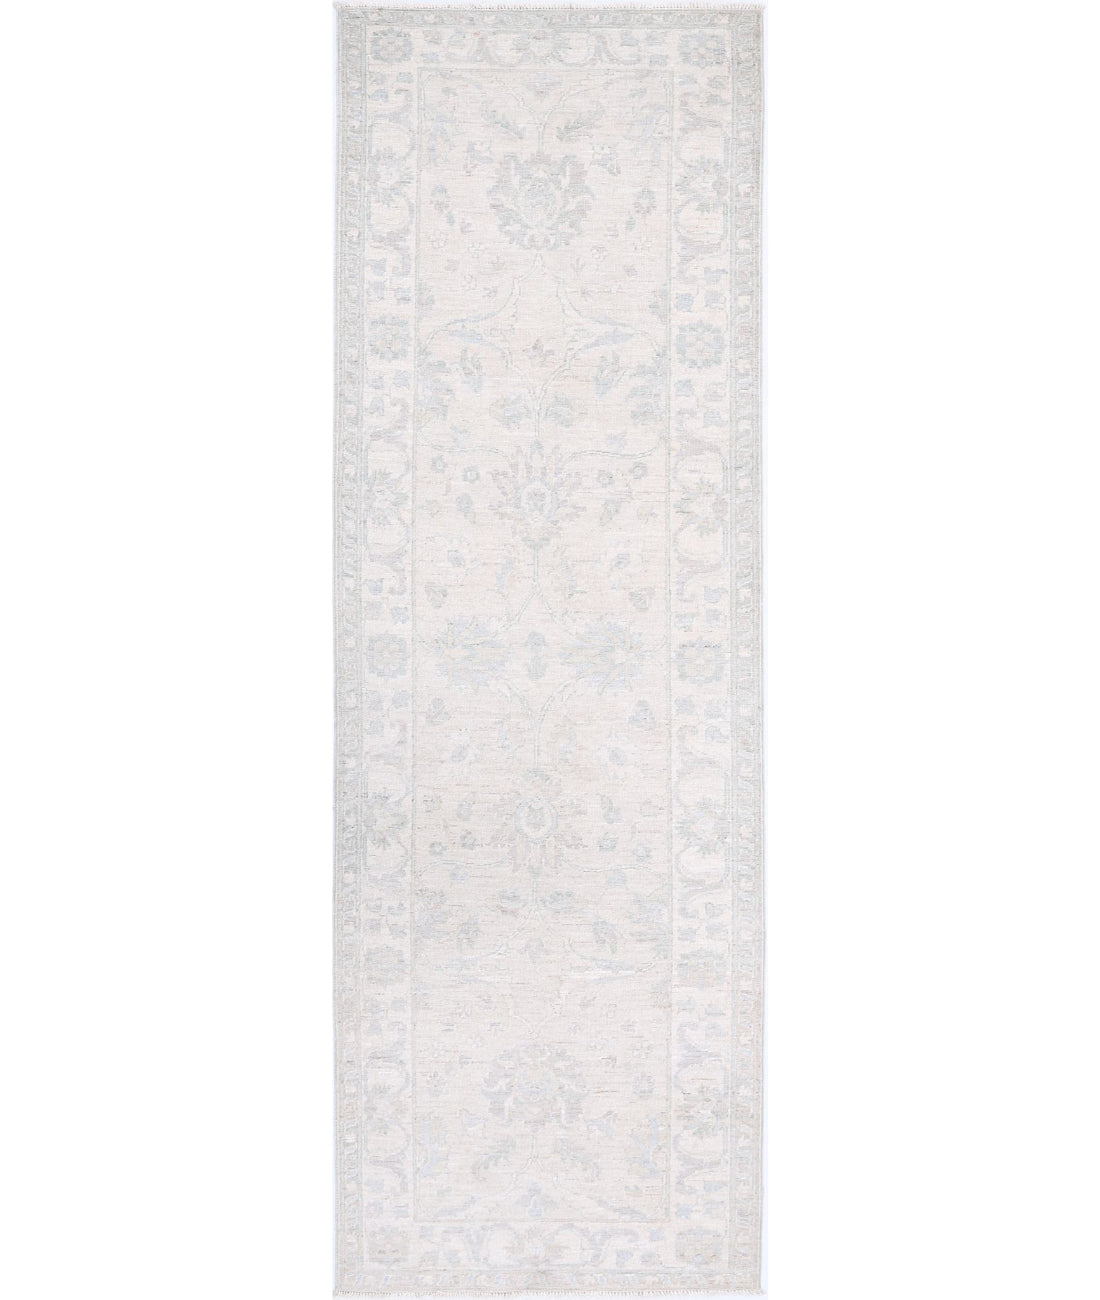 Hand Knotted Serenity Wool Rug - 2'7'' x 8'4'' 2'7'' x 8'4'' (78 X 250) / Taupe / Ivory